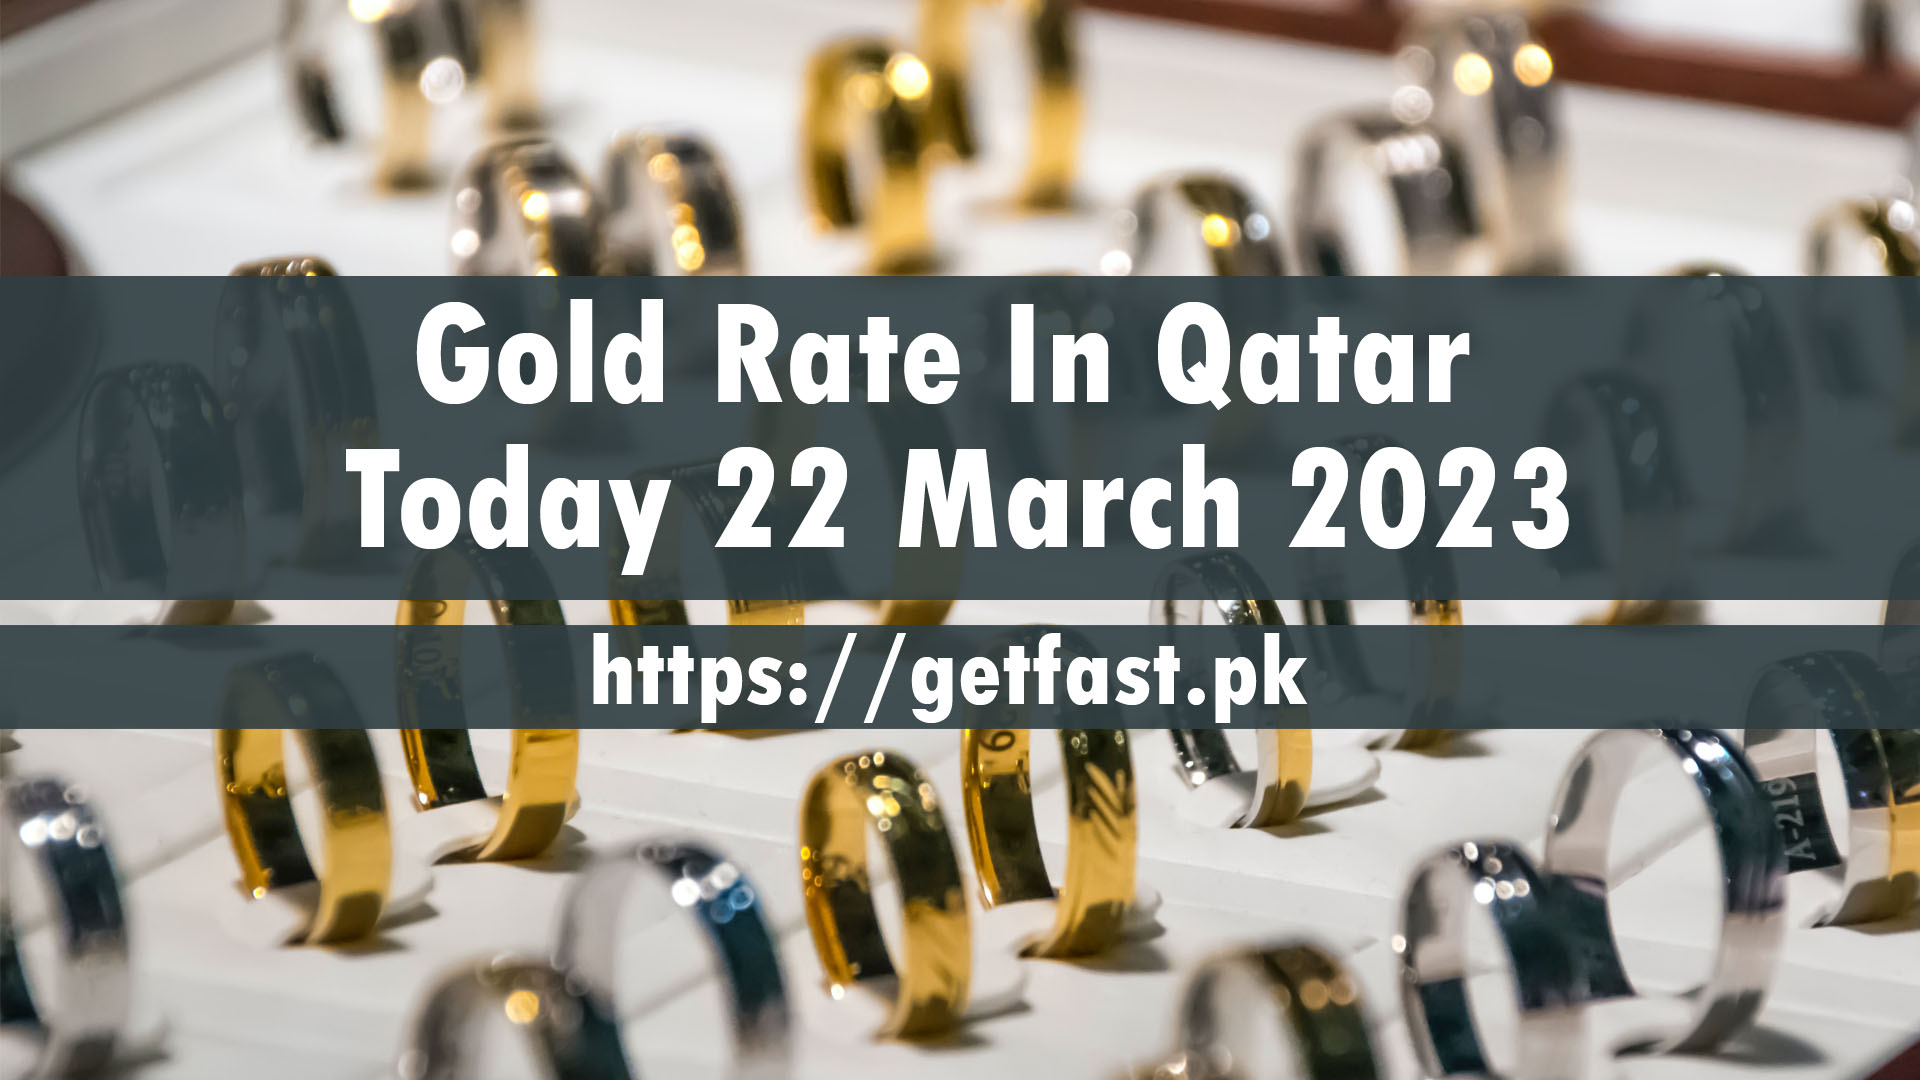 Gold Rate In Qatar Today 22 March 2023